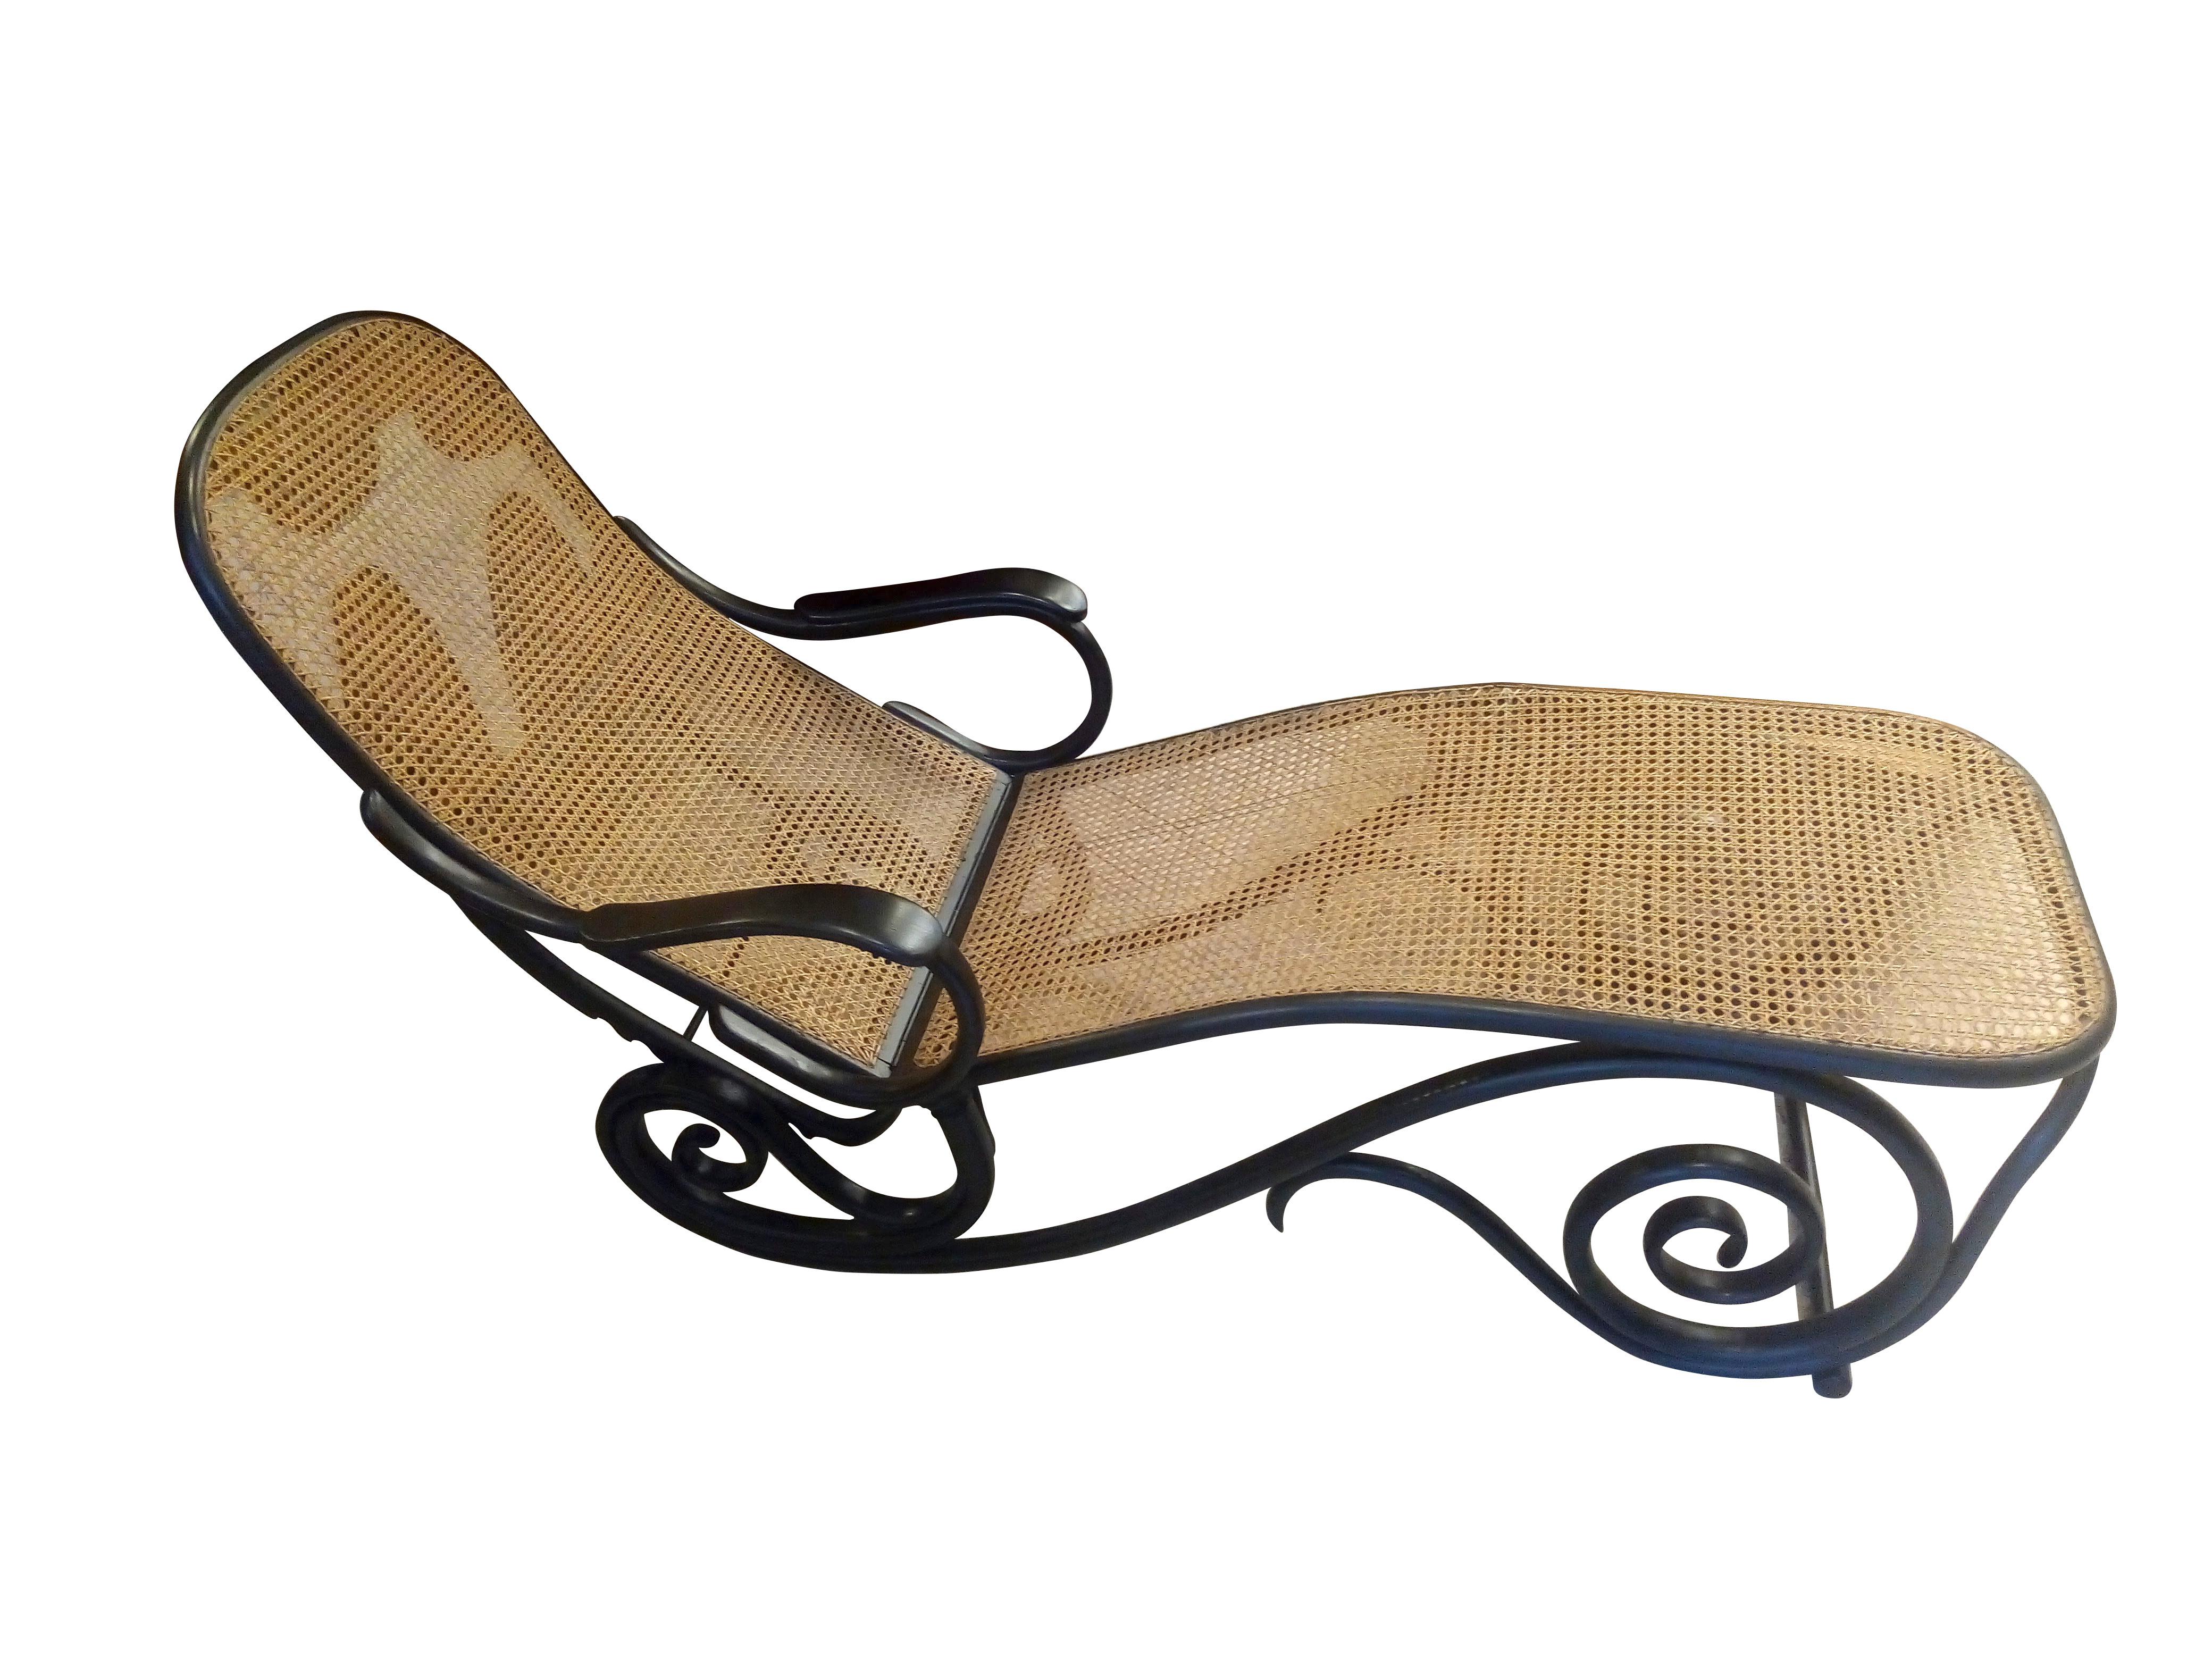 Amazing and comfortable adjustable lounge chair in bent wood and cane manufactured circa 1900 in Austria by Thonet Gebruder (Thoner Brothers) Company. The back rest has 6 adjustable positions for maximum comfort and versatility. Ideal for resting